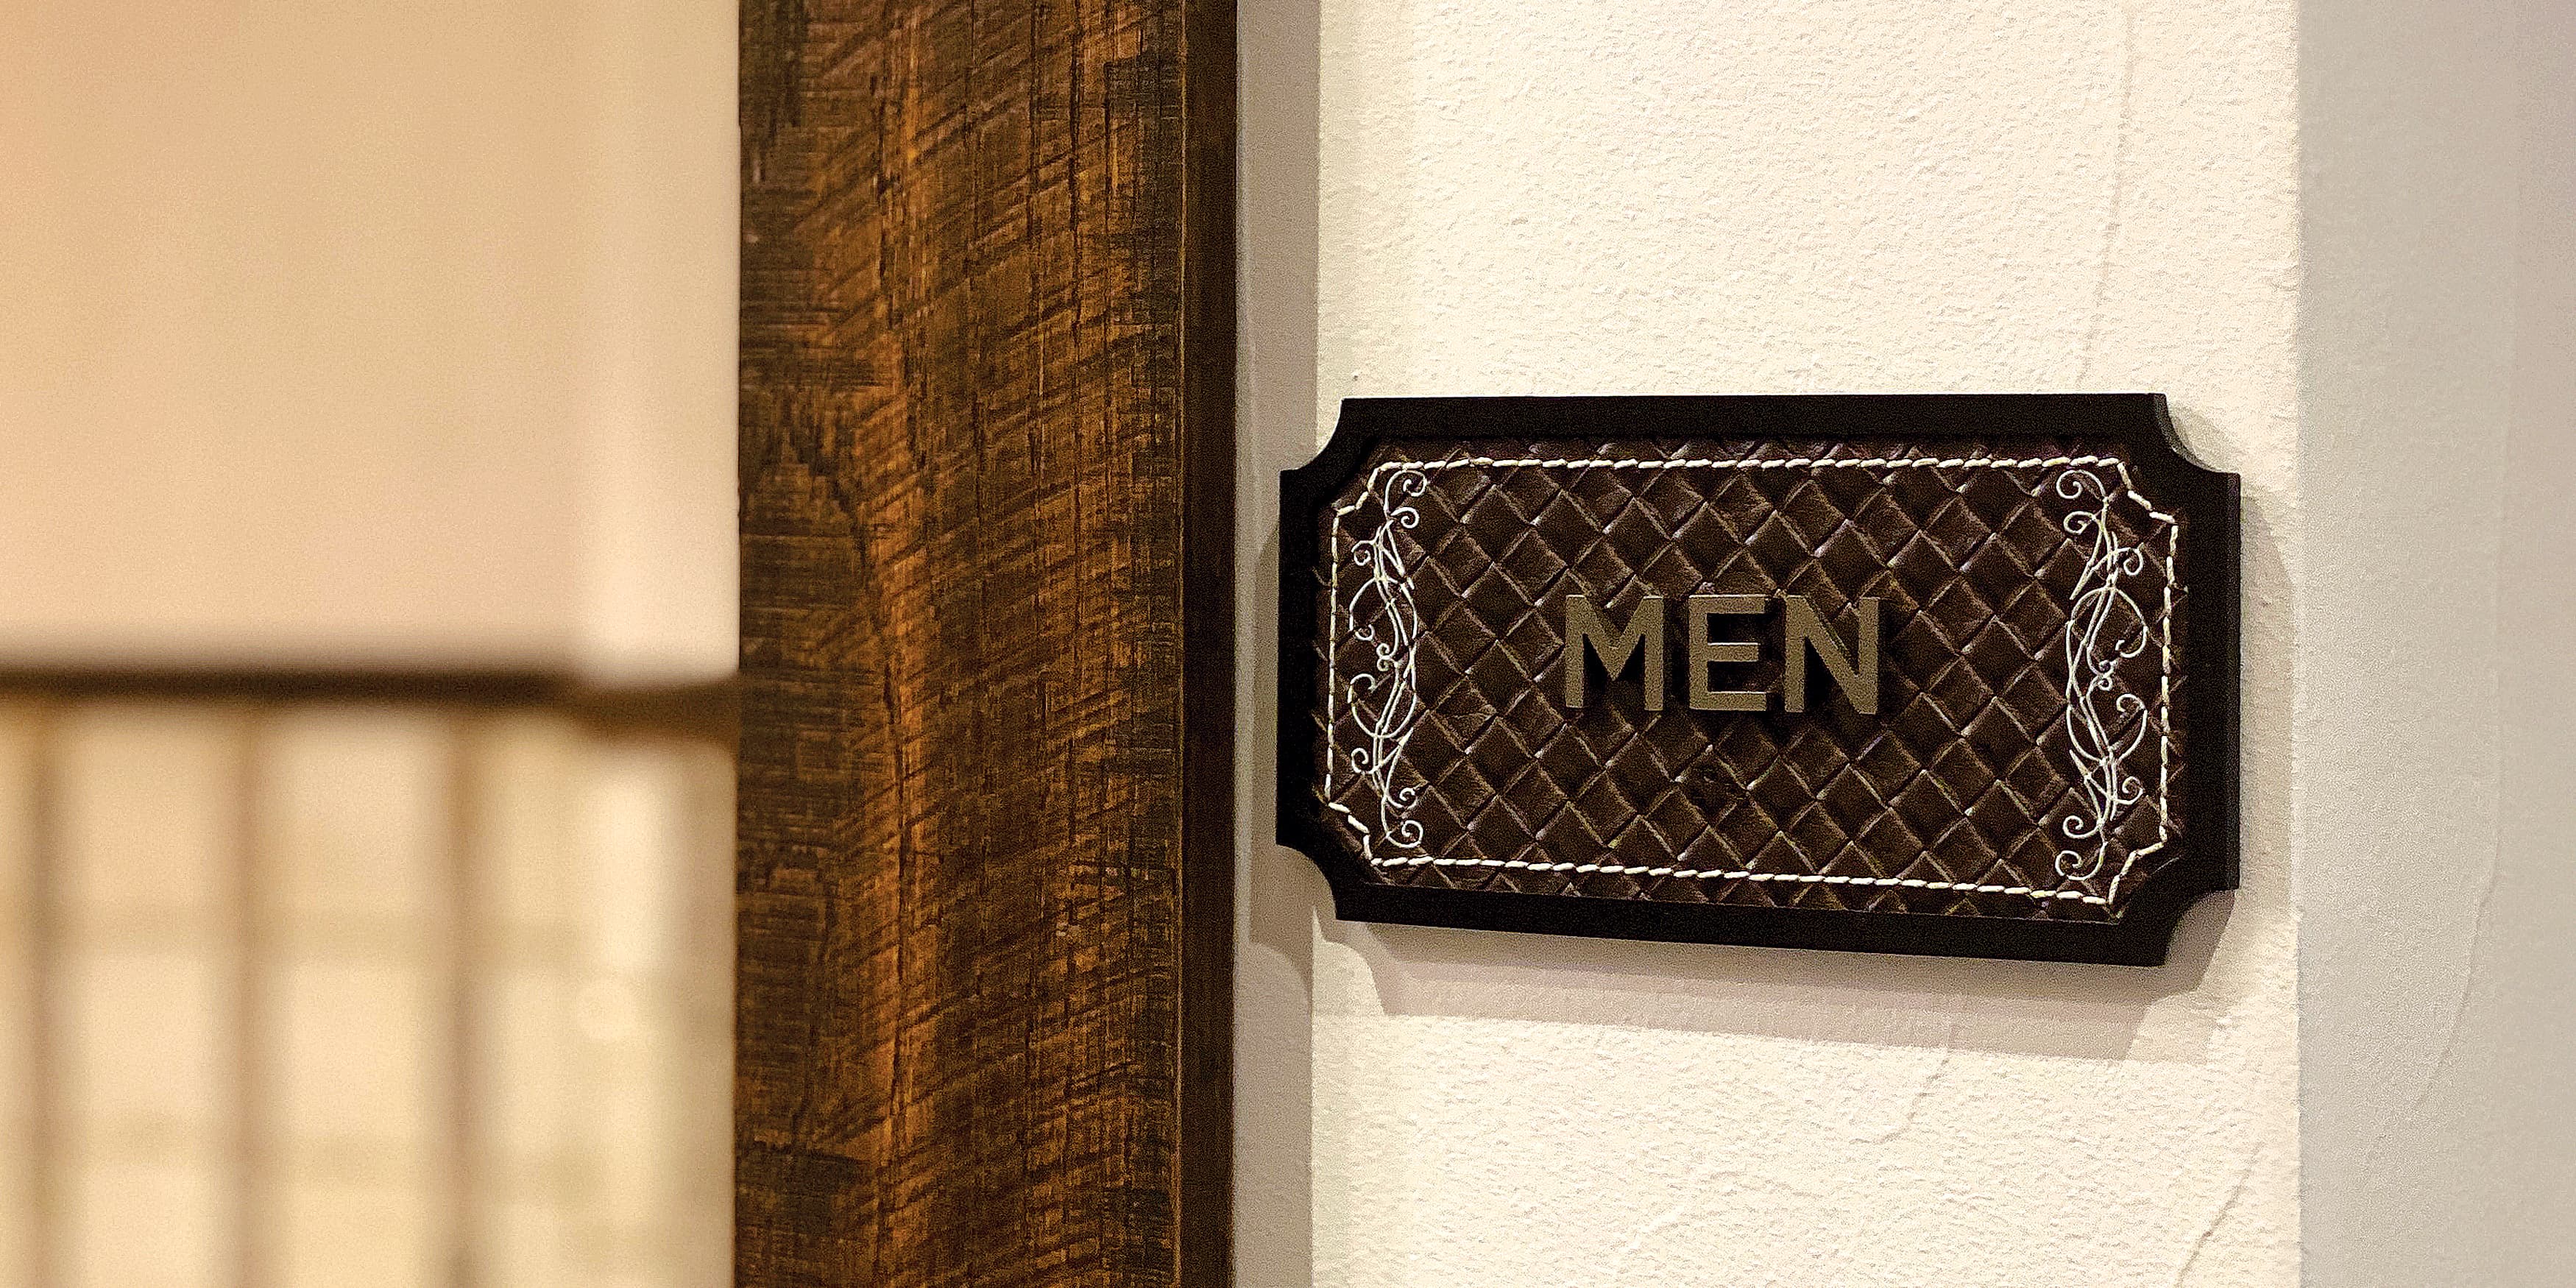 Men's restroom signage directional for The Drover Hotel in Fort Worth, Texas.